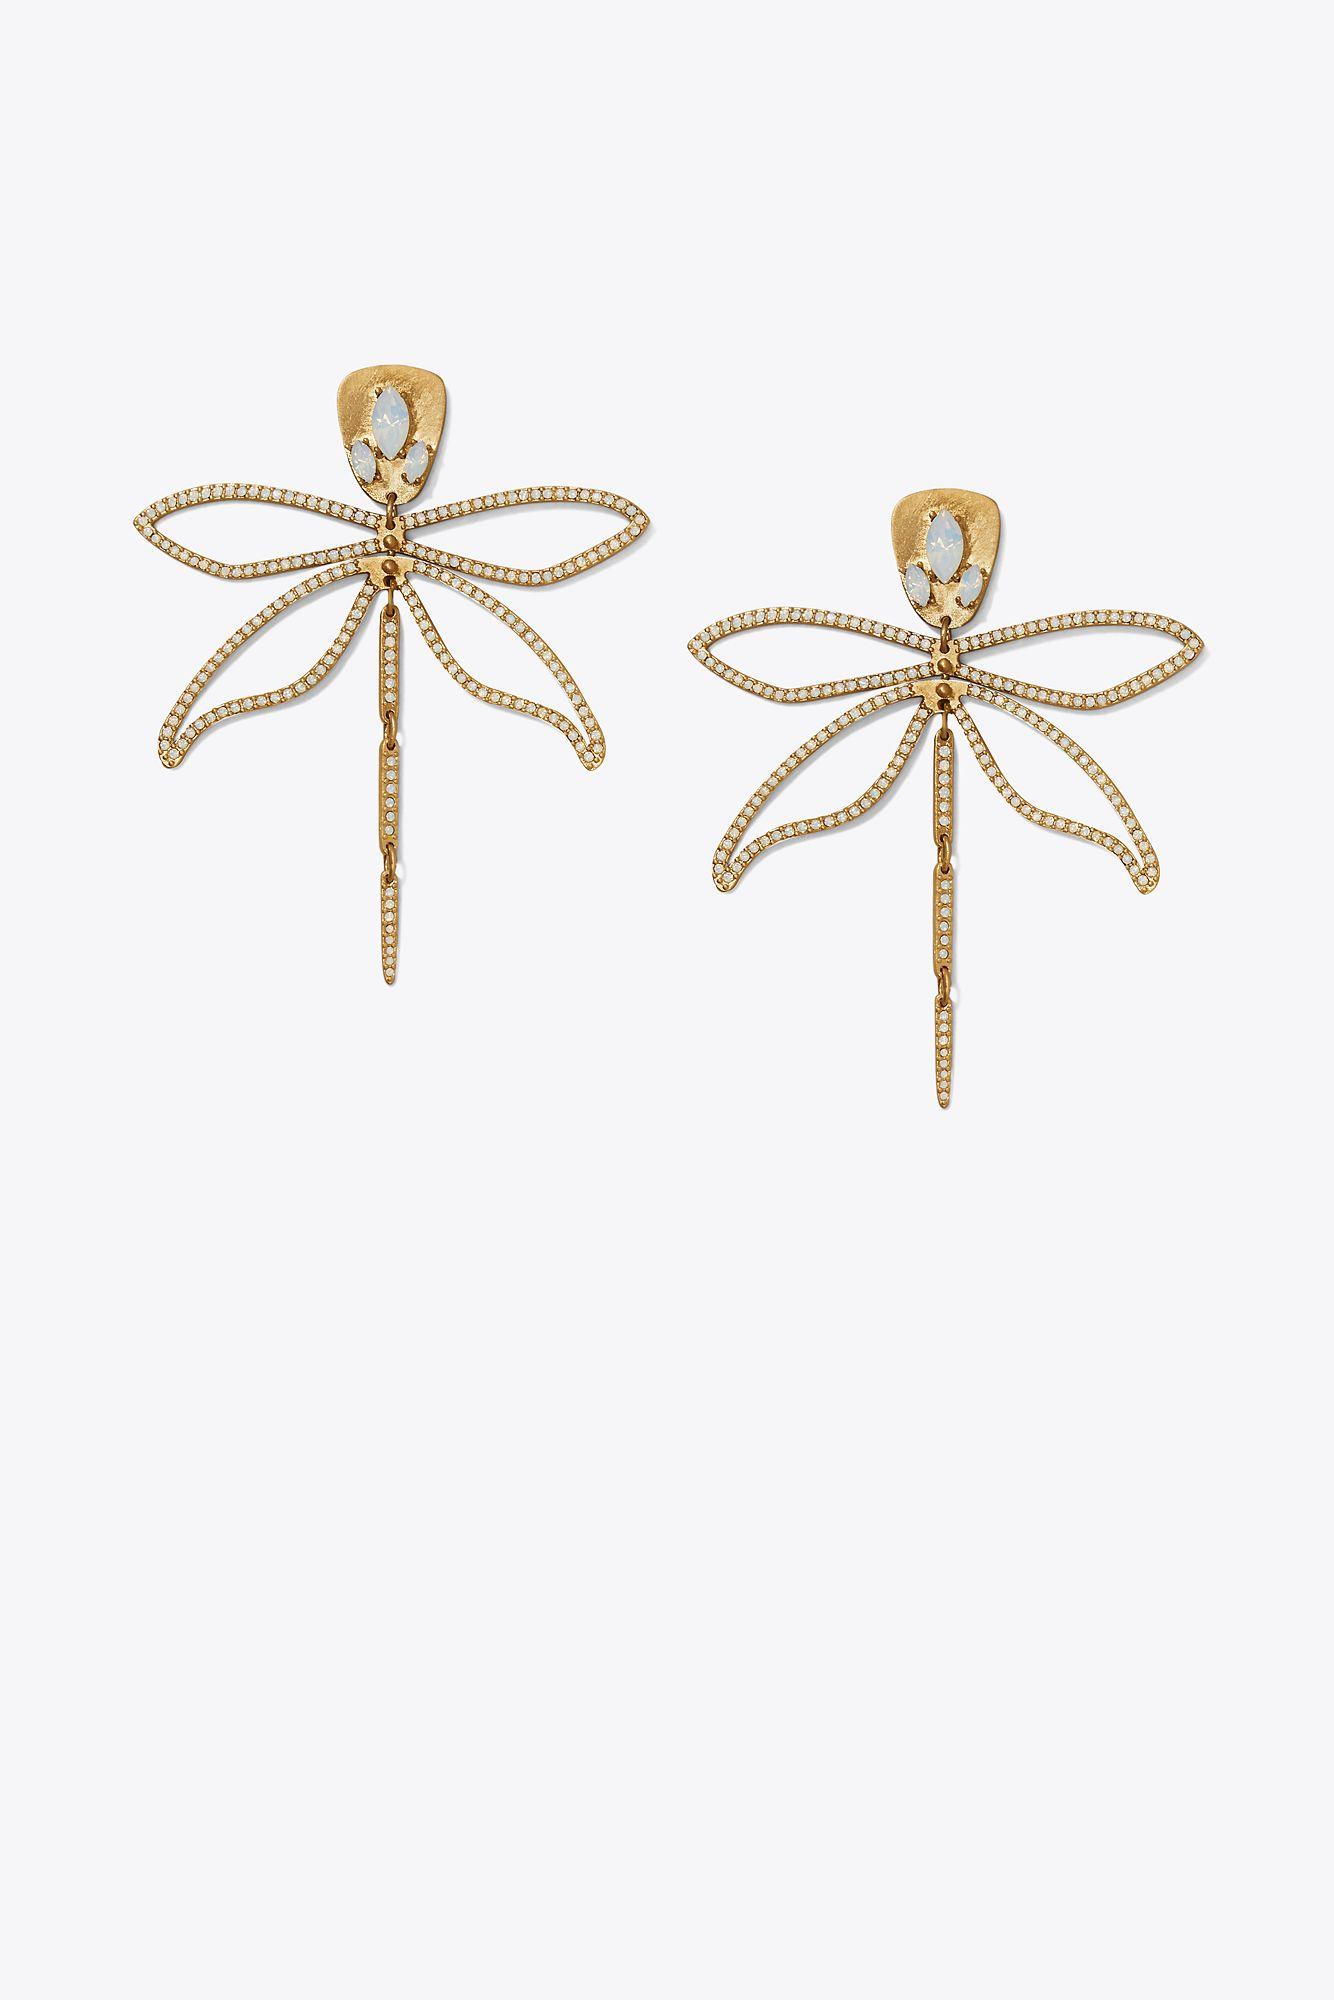 Tory Burch Dragonfly Earrings Hotsell, SAVE 39% 